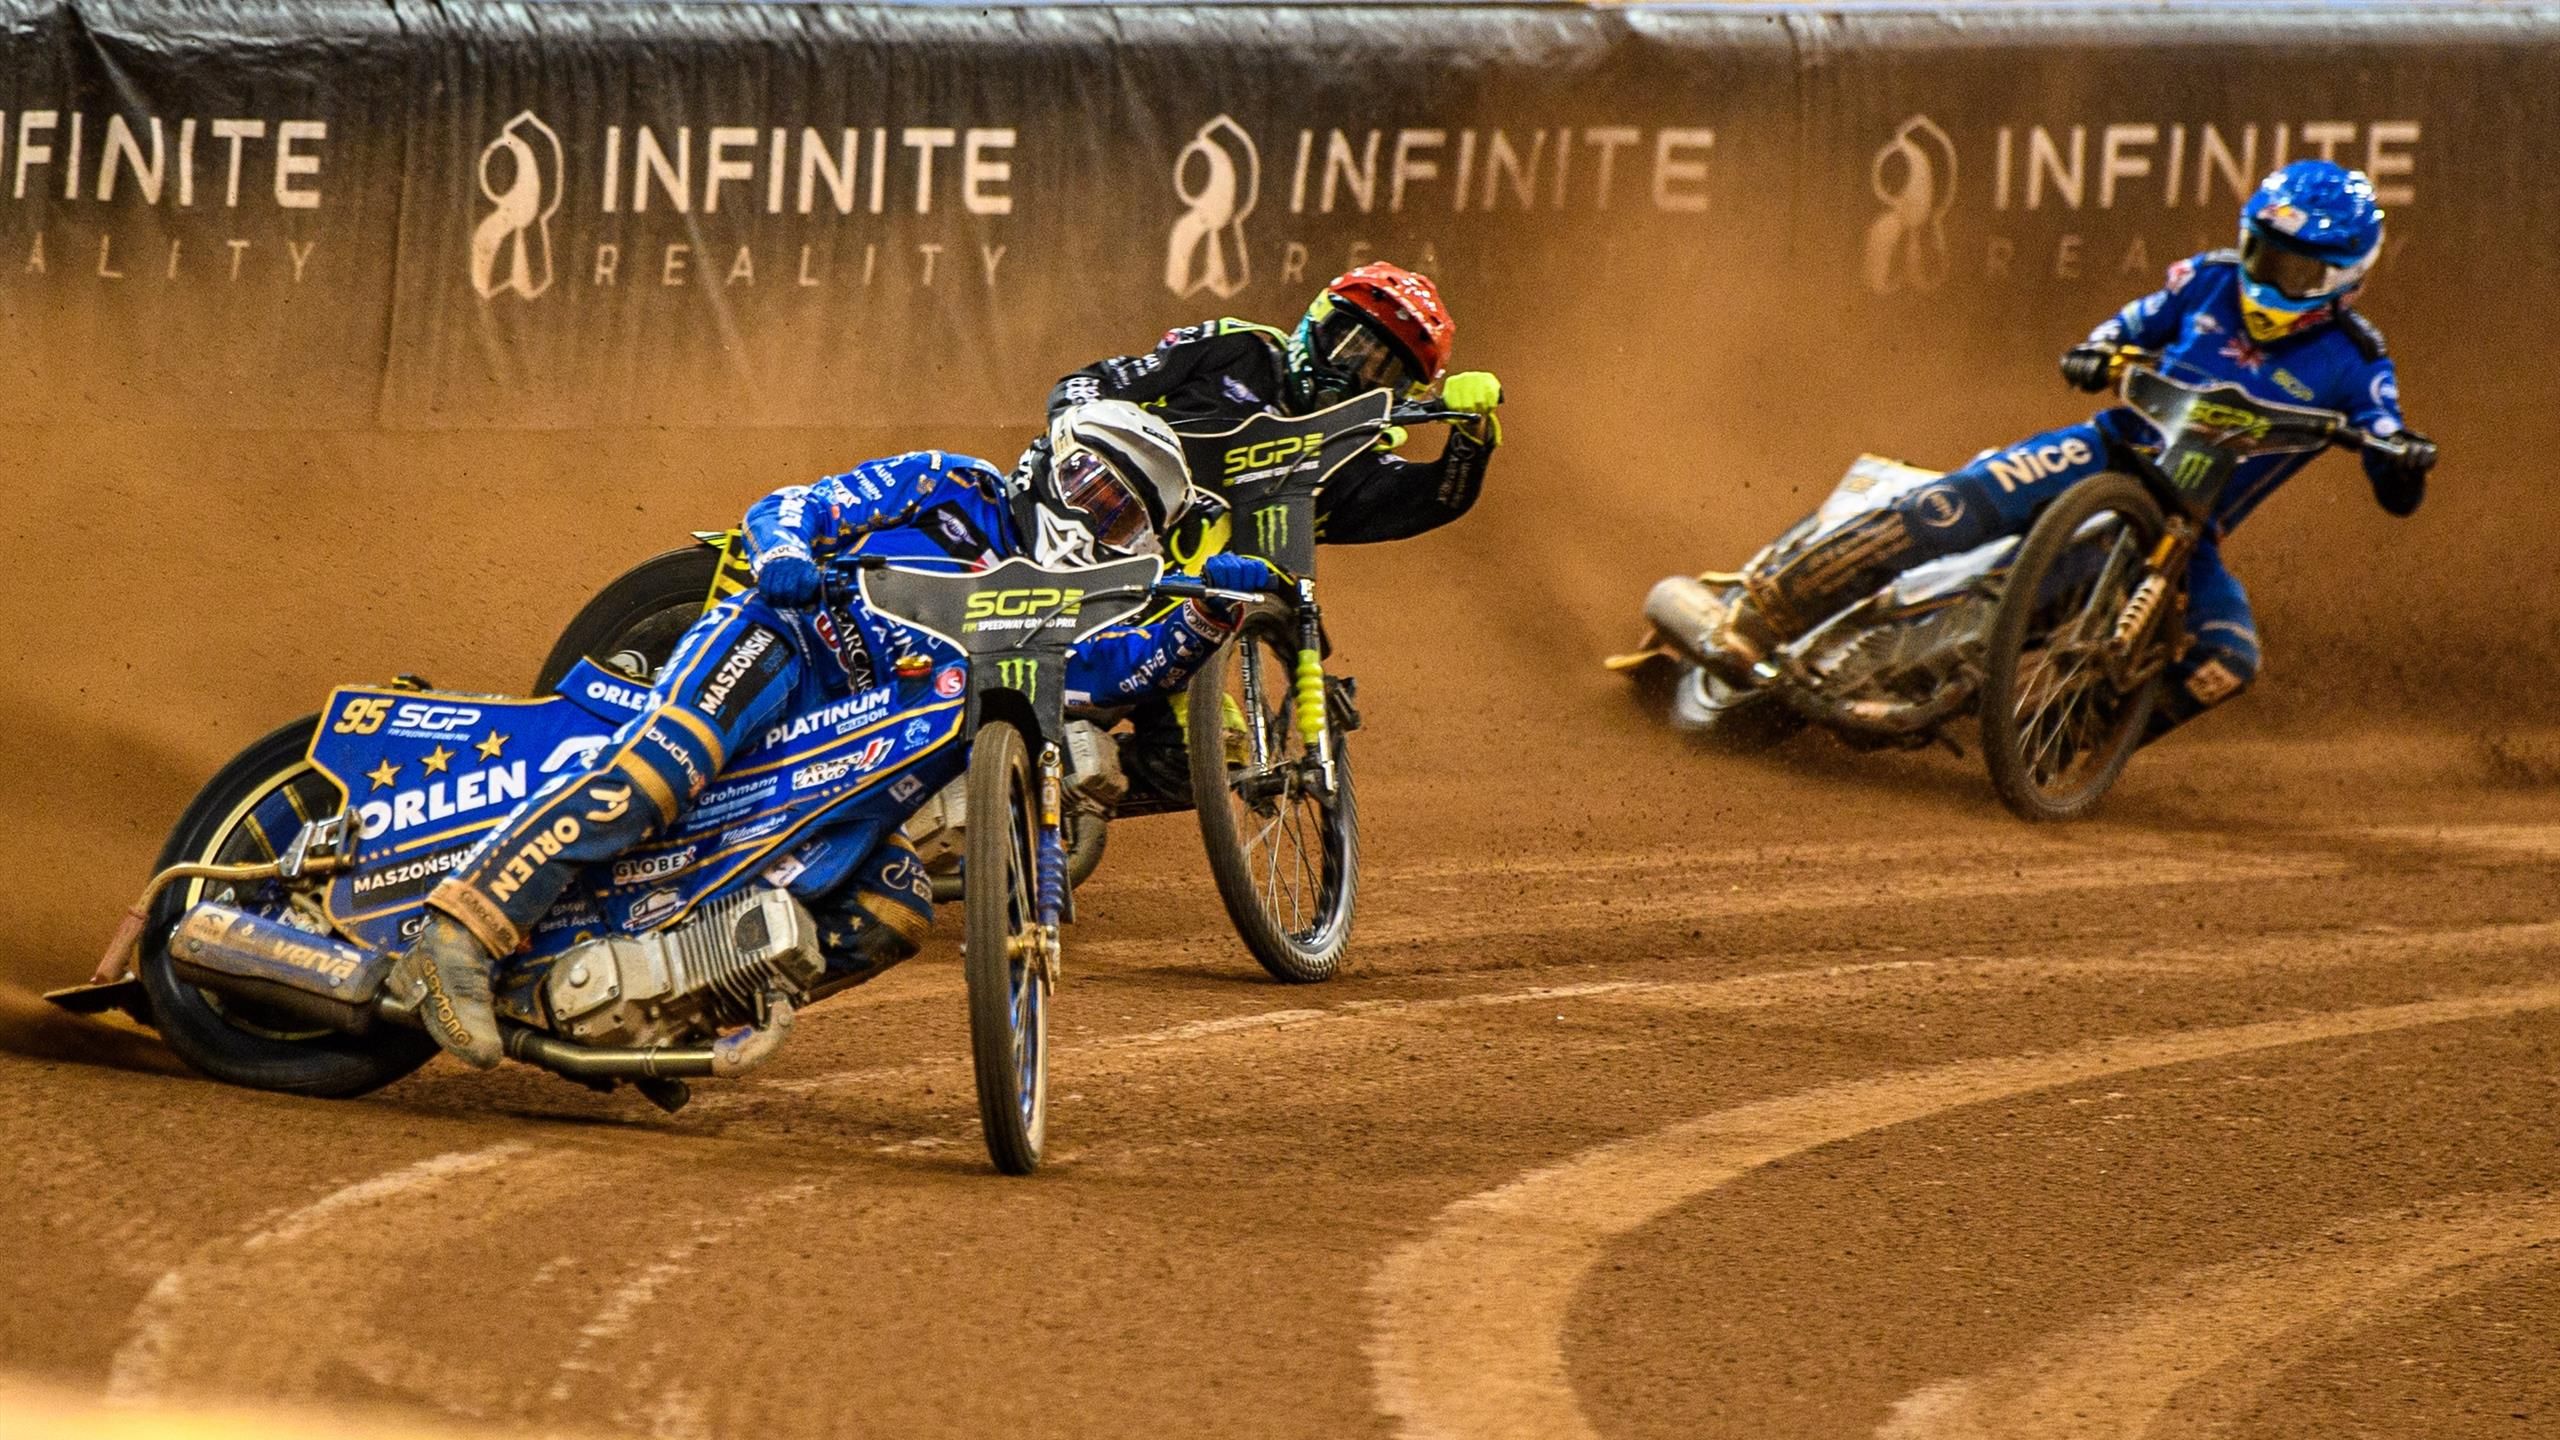 Speedway Grand Prix 2023 Live stream, TV coverage, schedule and riders as Bartosz Zmarzlik defends title